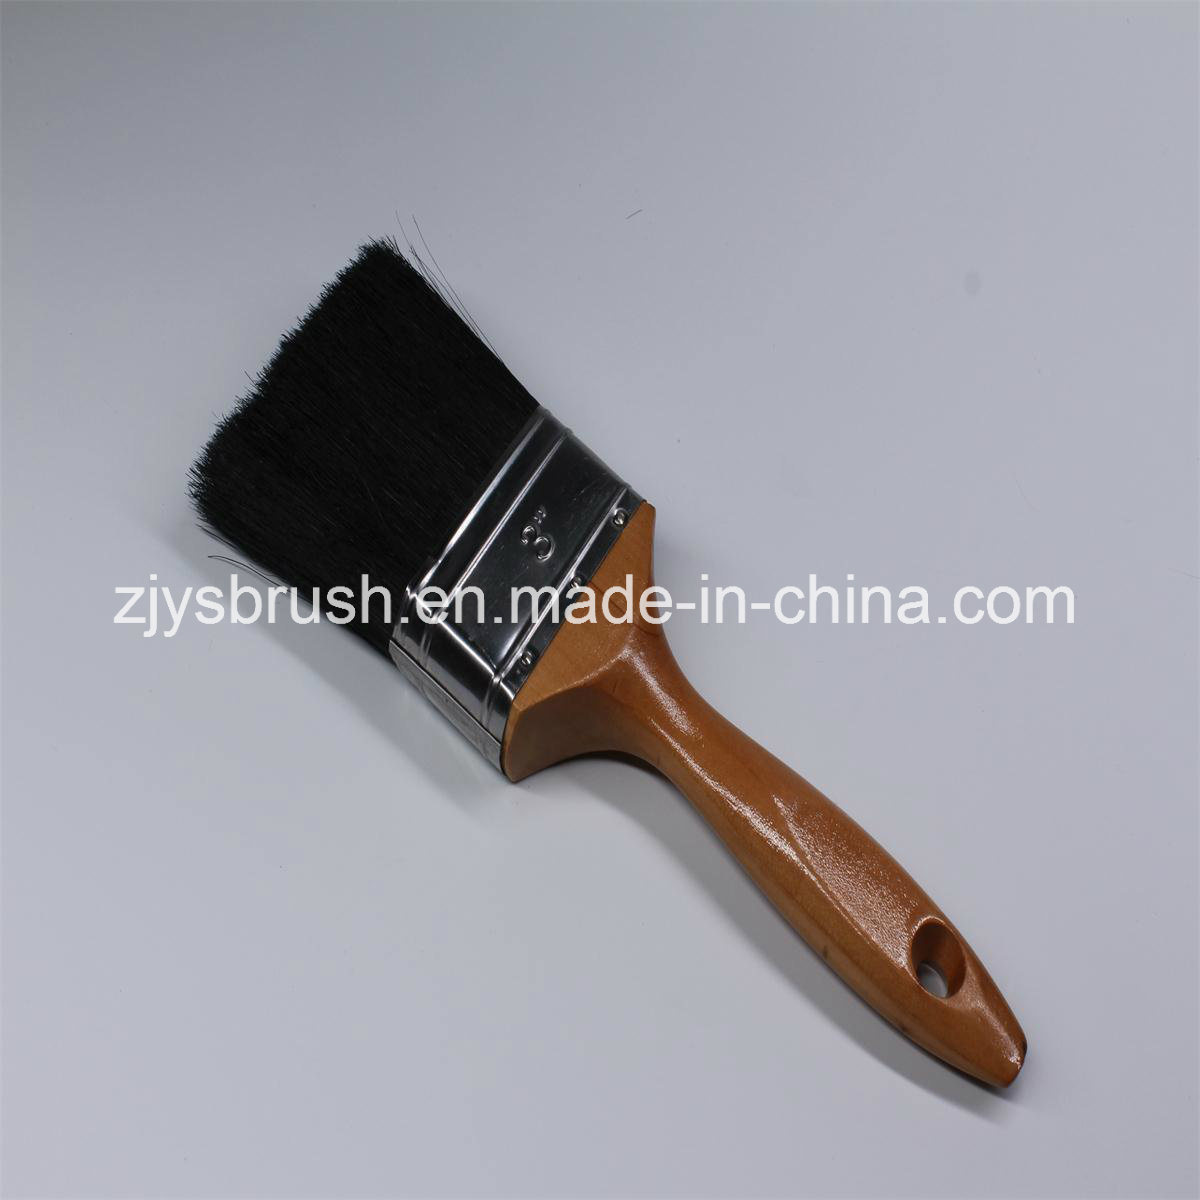 50% Black Boiled Bristle Paint Brush with Competitive Price